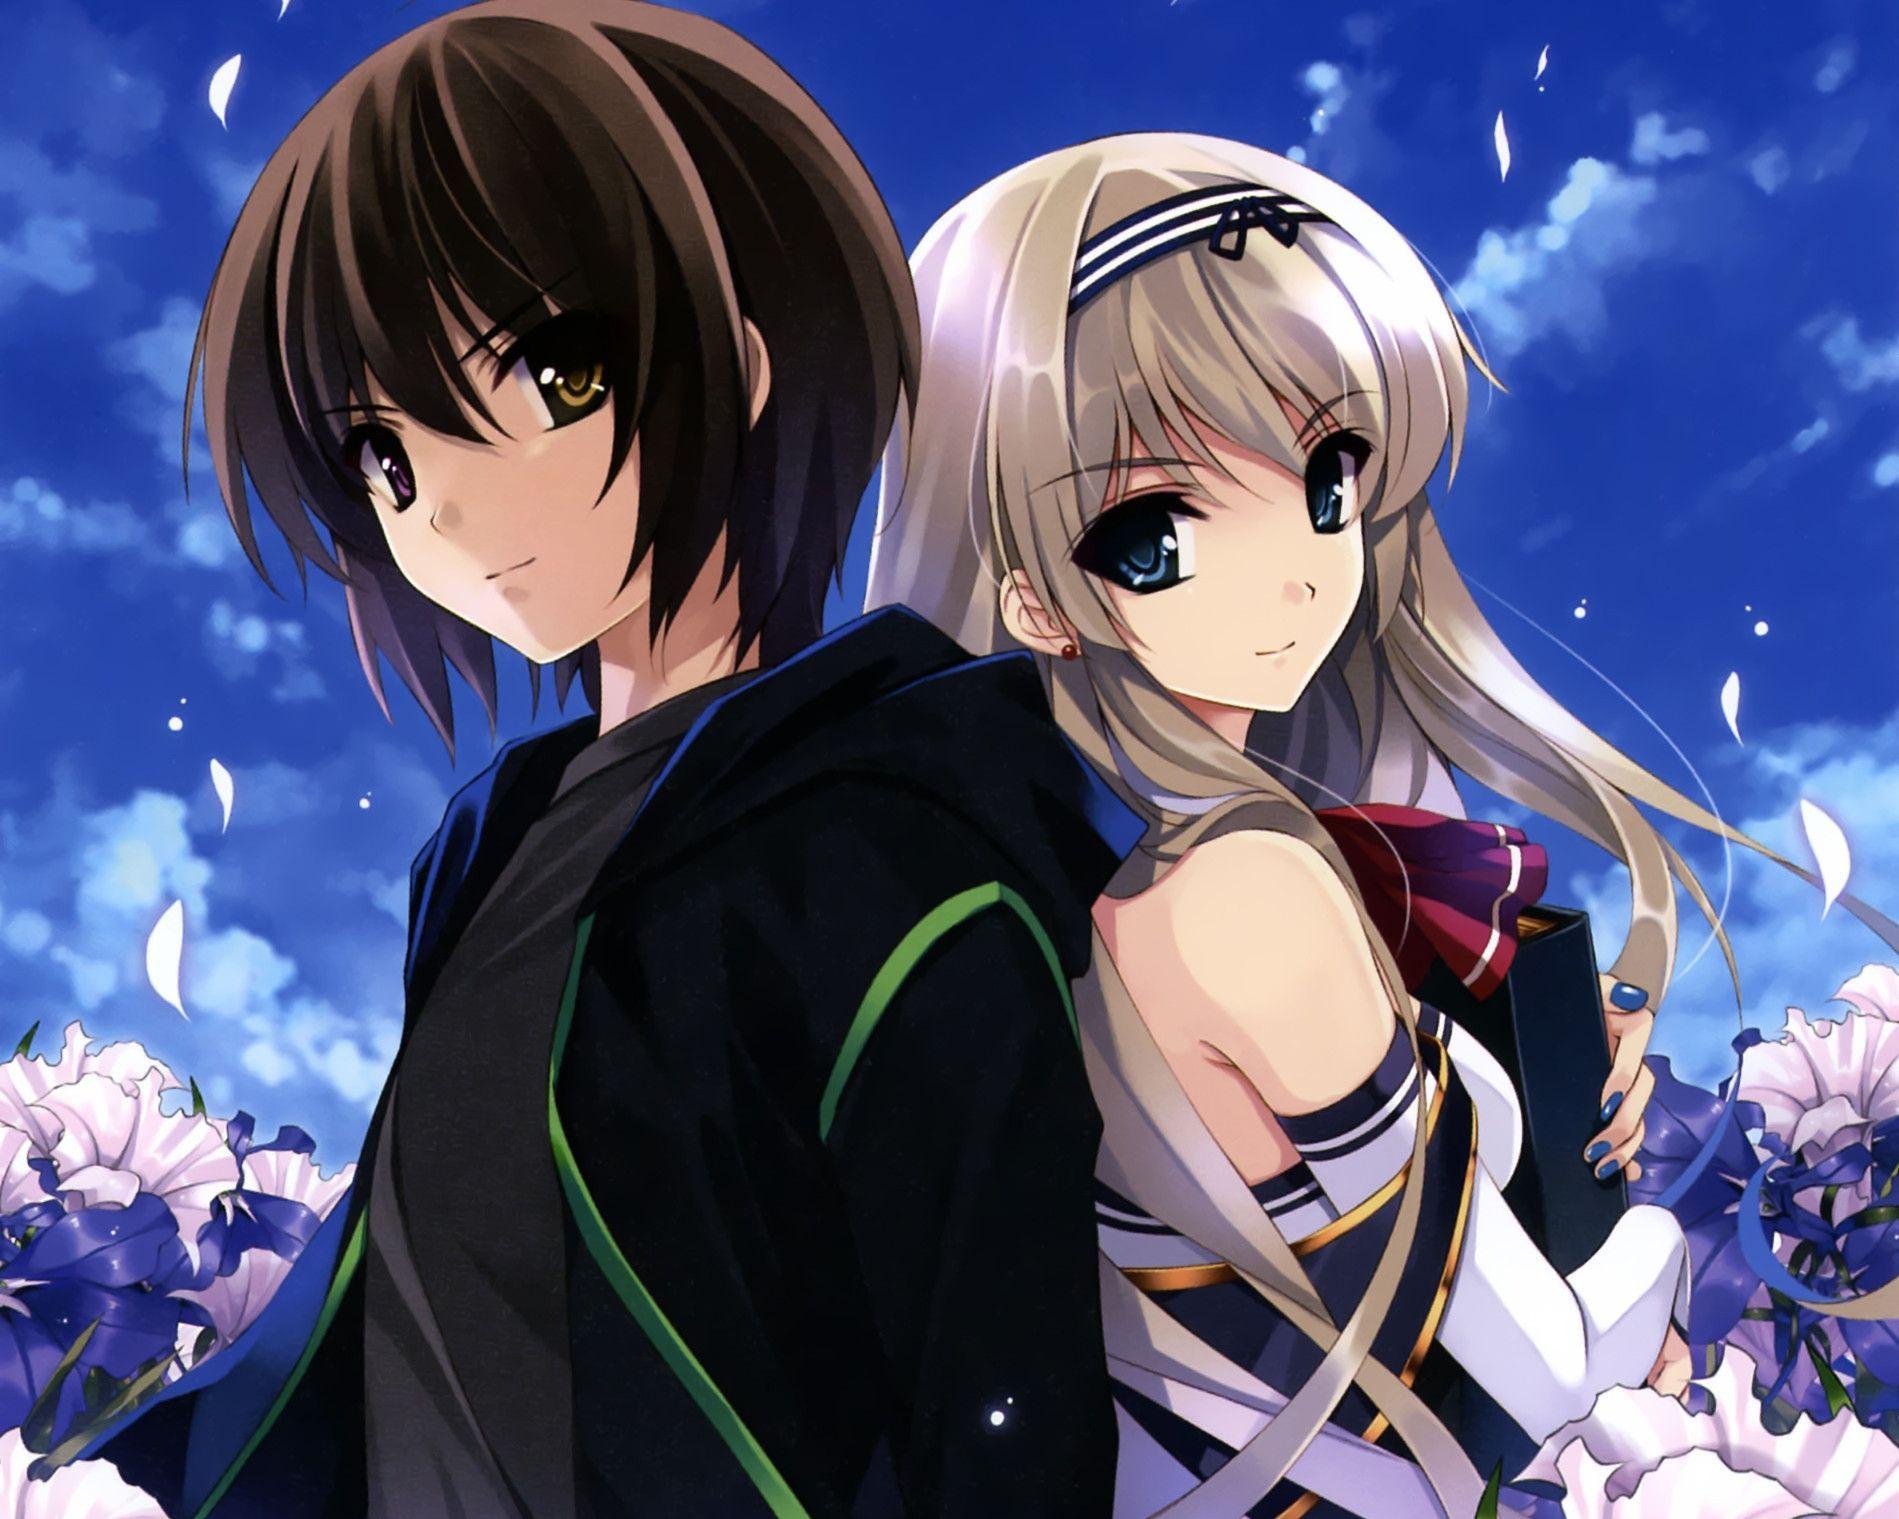 3D Anime Couple 1080p Wallpapers - Wallpaper Cave